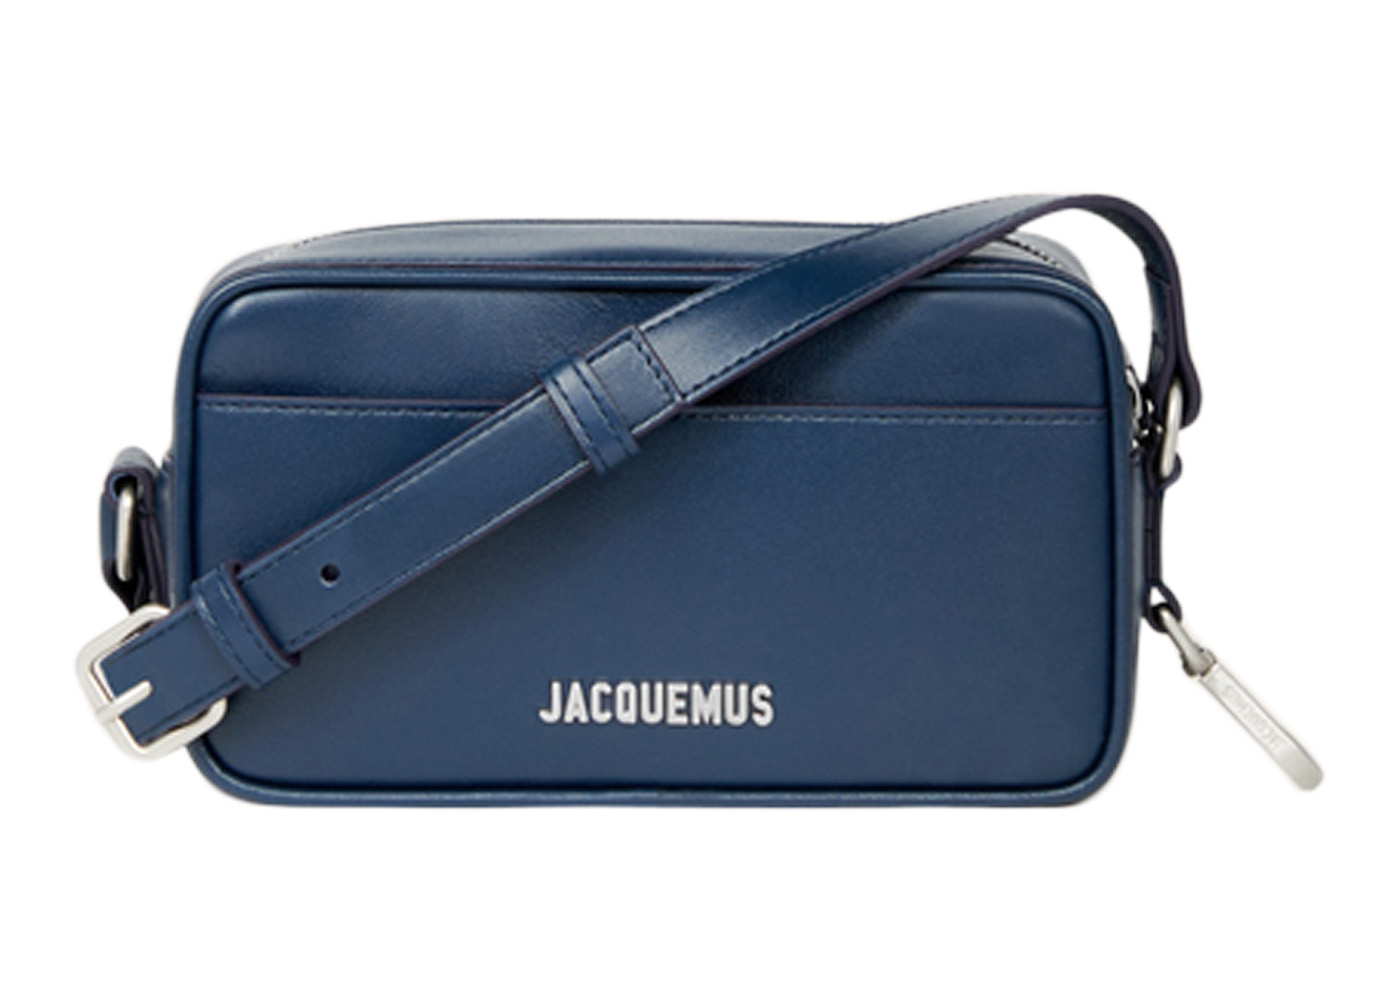 Jacquemus Le Baneto Strap Pochette Bag Navy in Cowskin Leather 